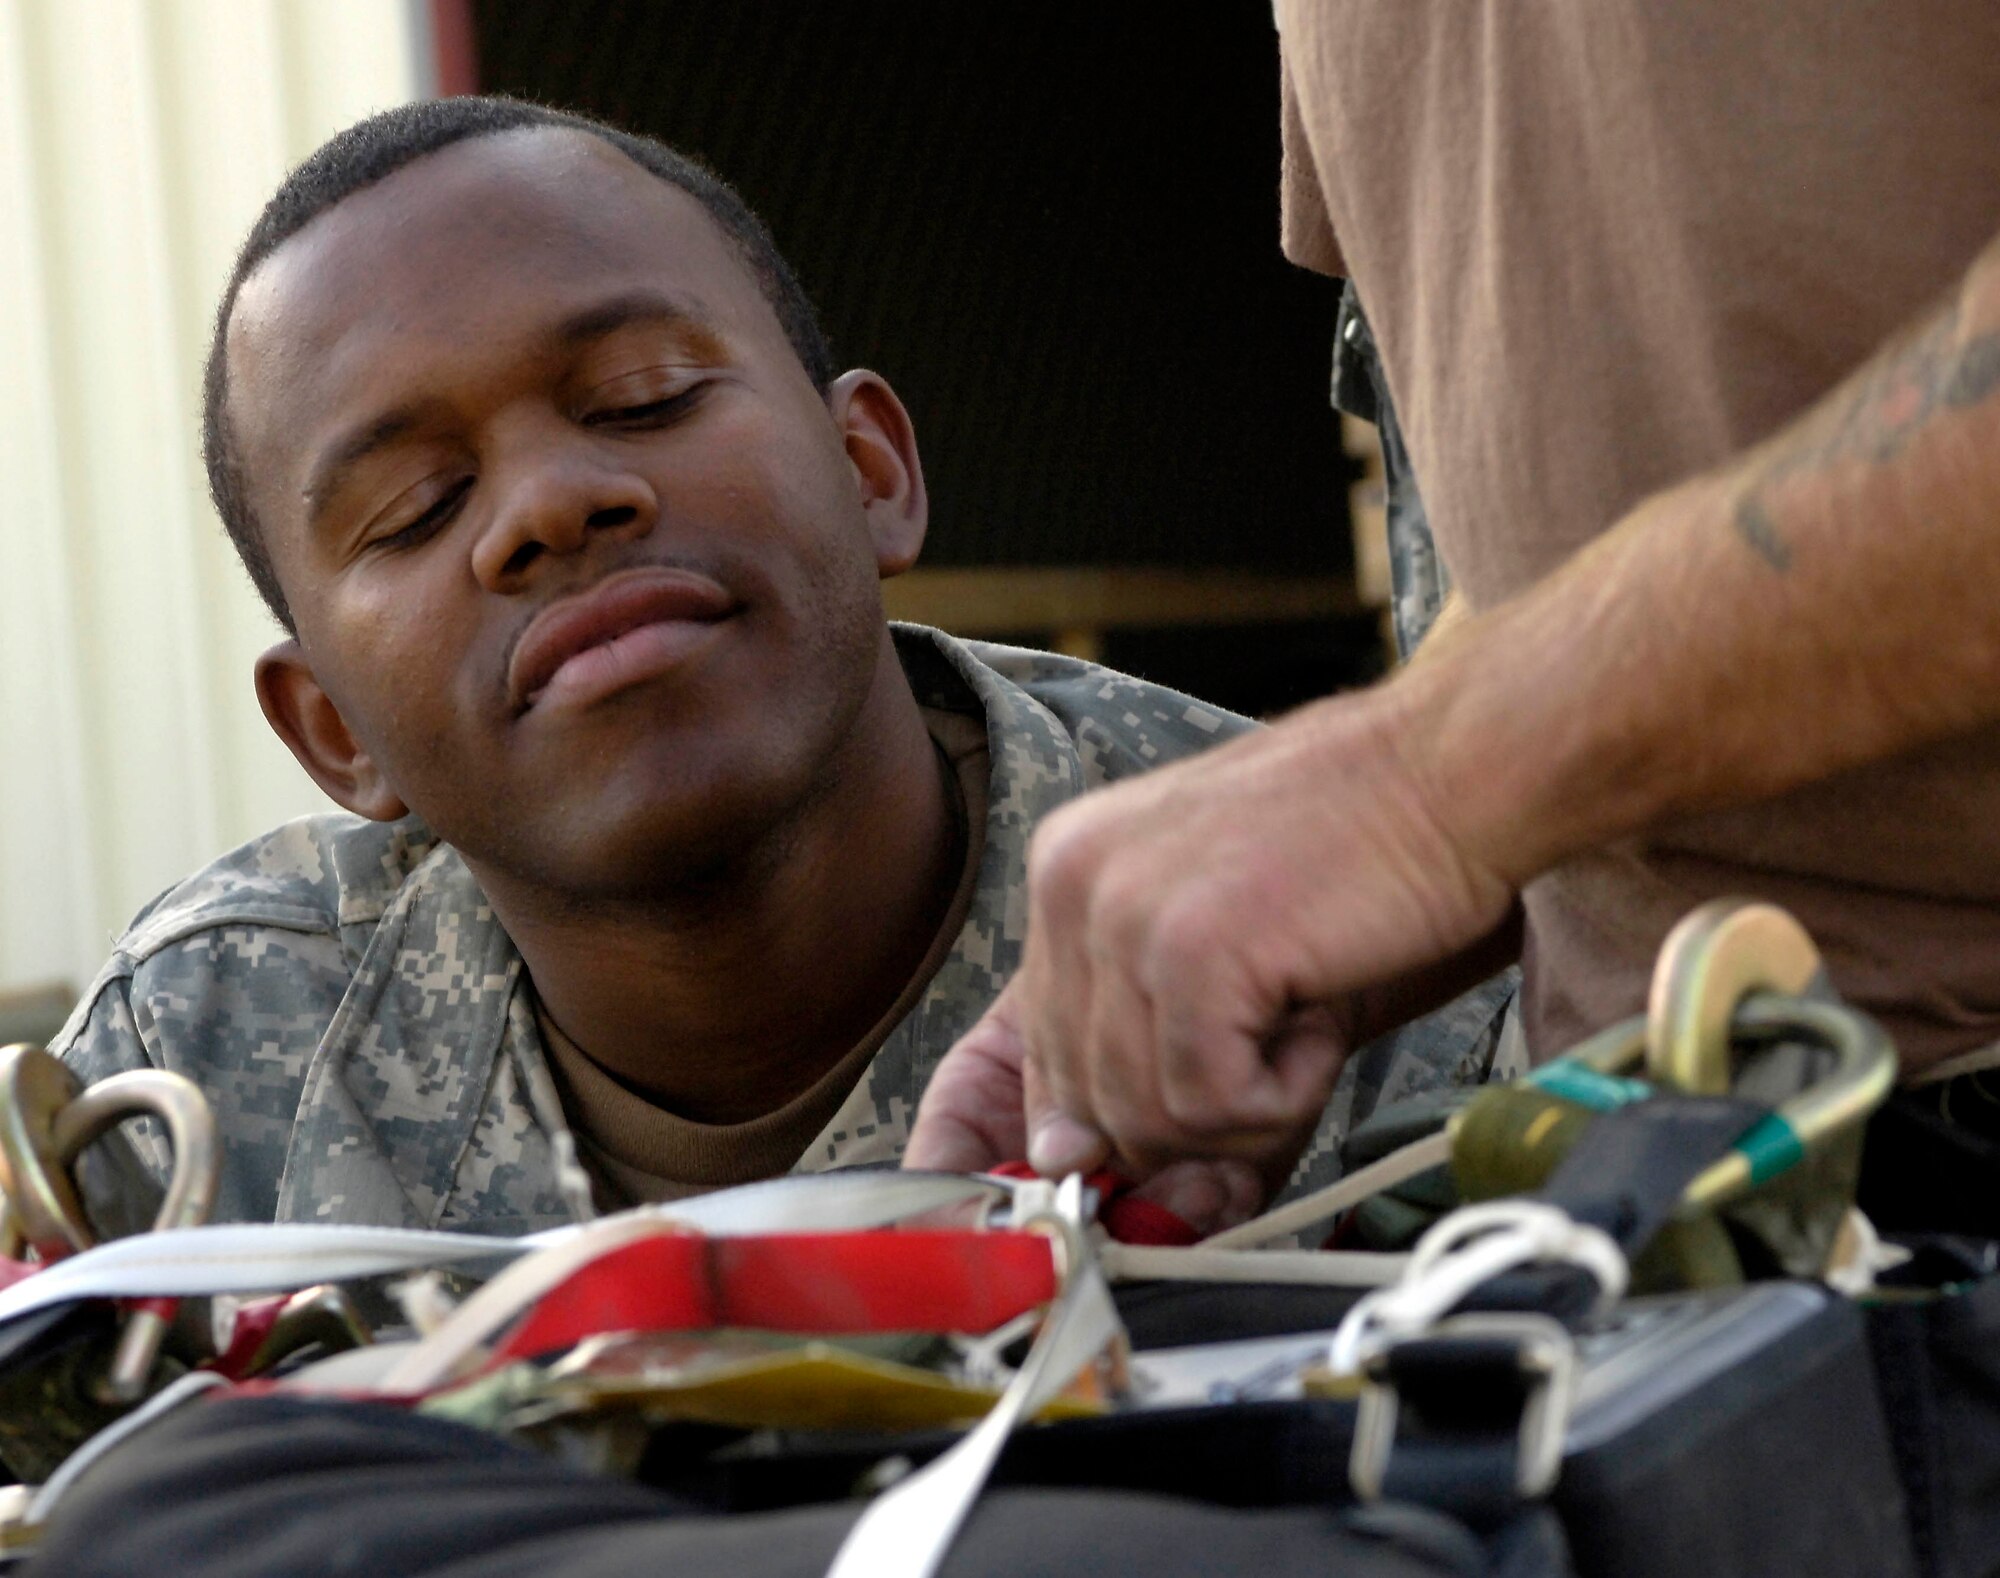 Specialist Denton Carter watches as a Department of Defense contractor shows him how to rig the new Joint Precision Air Drop System in Bagram Afghanistan Aug. 25, 2006. The system, going through operational testing here, is designed to deliver airdrop loads to troops on the ground with more precision than the normal airdrop system.  Spc. Carter is a parachute rigger with the 647th Quartermaster Detachment.  
(U.S. Air Force photo/Senior Airman Brian Ferguson)
